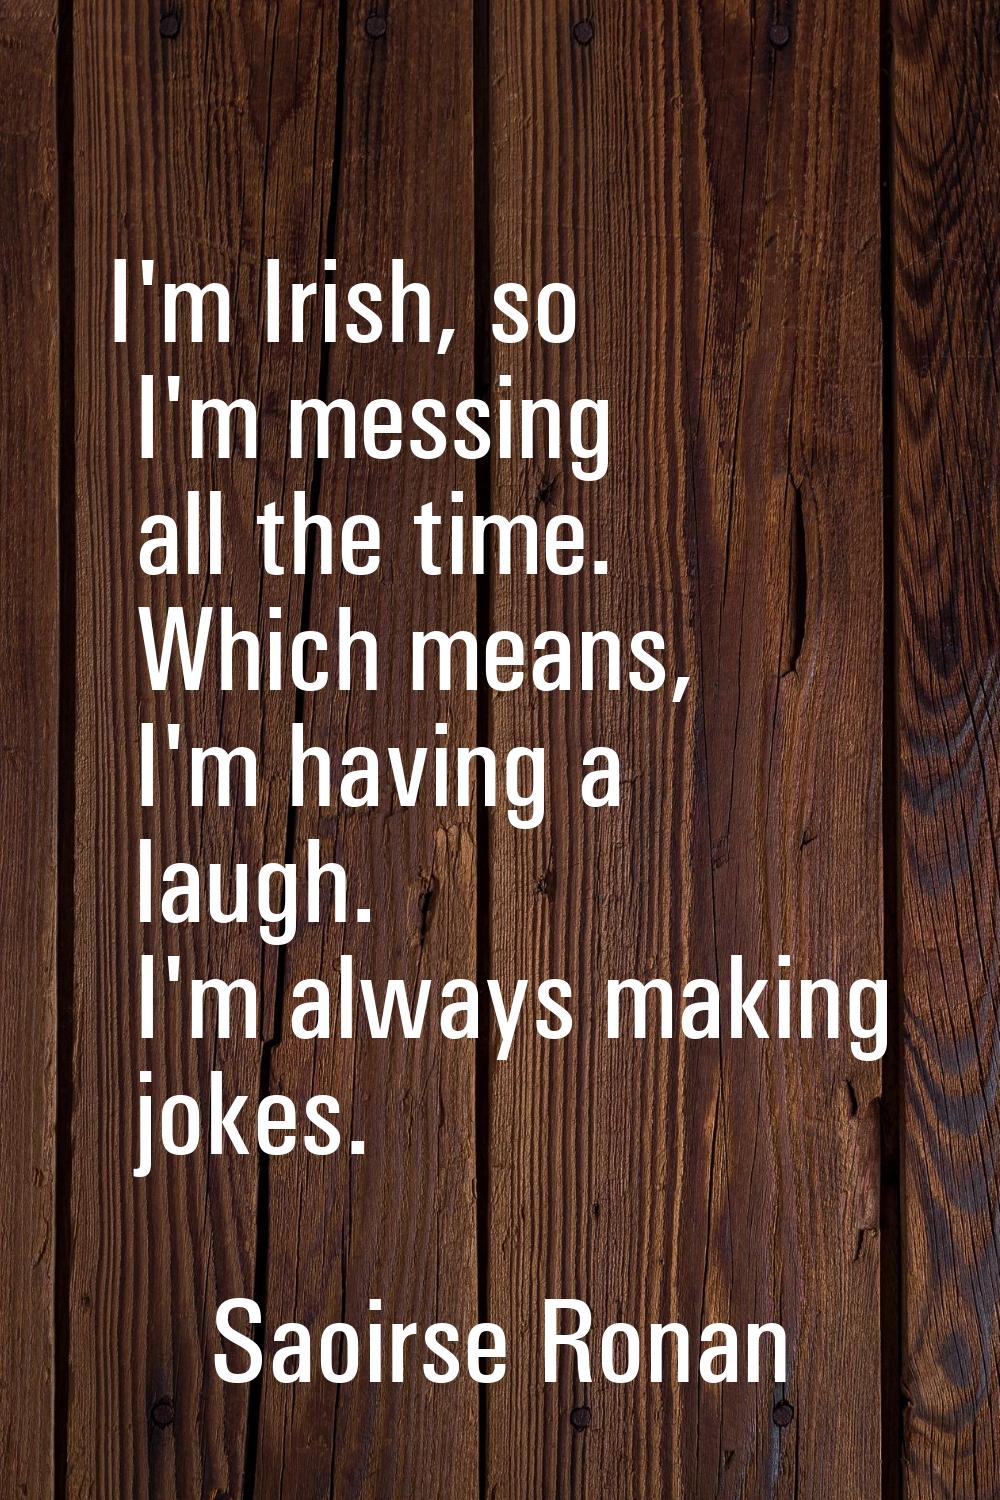 I'm Irish, so I'm messing all the time. Which means, I'm having a laugh. I'm always making jokes.